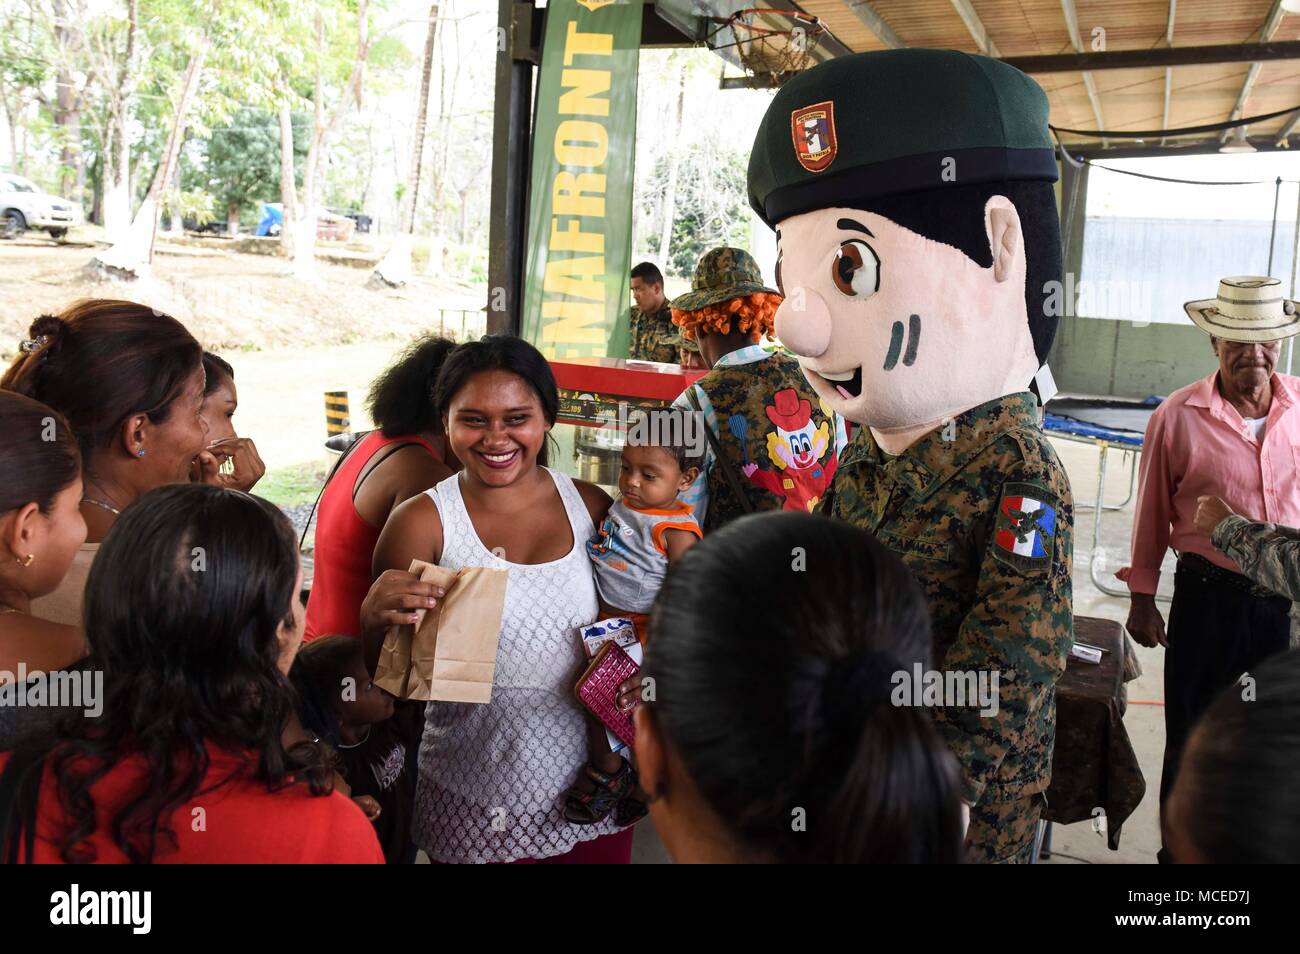 Mascots for the Panamanian National Border Service, known as SENAFRONT, greet guests at the opening ceremony of Exercise New Horizons 2018, April 11, 2018, in Meteti, Panama. The joint-service exercise will provide readiness training to U.S. military members, while also benefiting local communities throughout the country. During the exercise, U.S. military members will build three schools, one community center and a women’s health ward in the Meteti area. They will also work closely with Panamanian health providers bringing medical aid to people in the Darien, Coclé, and Veraguas Provinces. (U Stock Photo